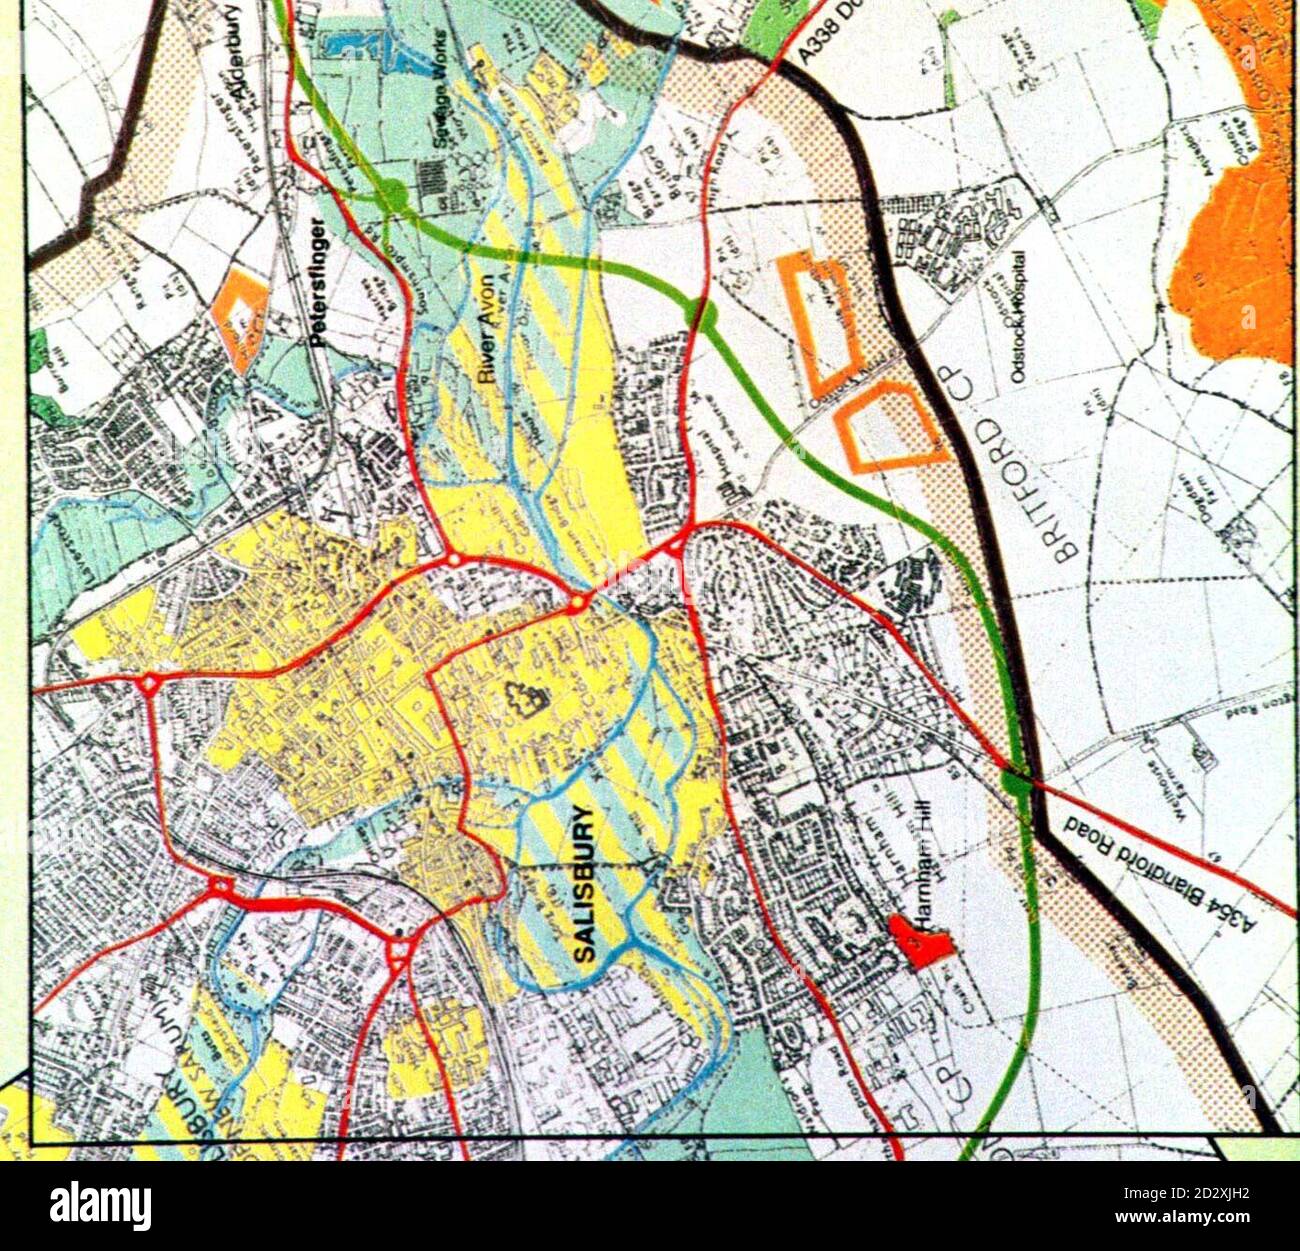 Map of area with green line showing the proposed route of the new by-pass road around Salisbury.They are among over 20 environment and transport groups calling for the controversial  75 million Salisbury by-pass scheme to be scrapped. PA Stock Photo